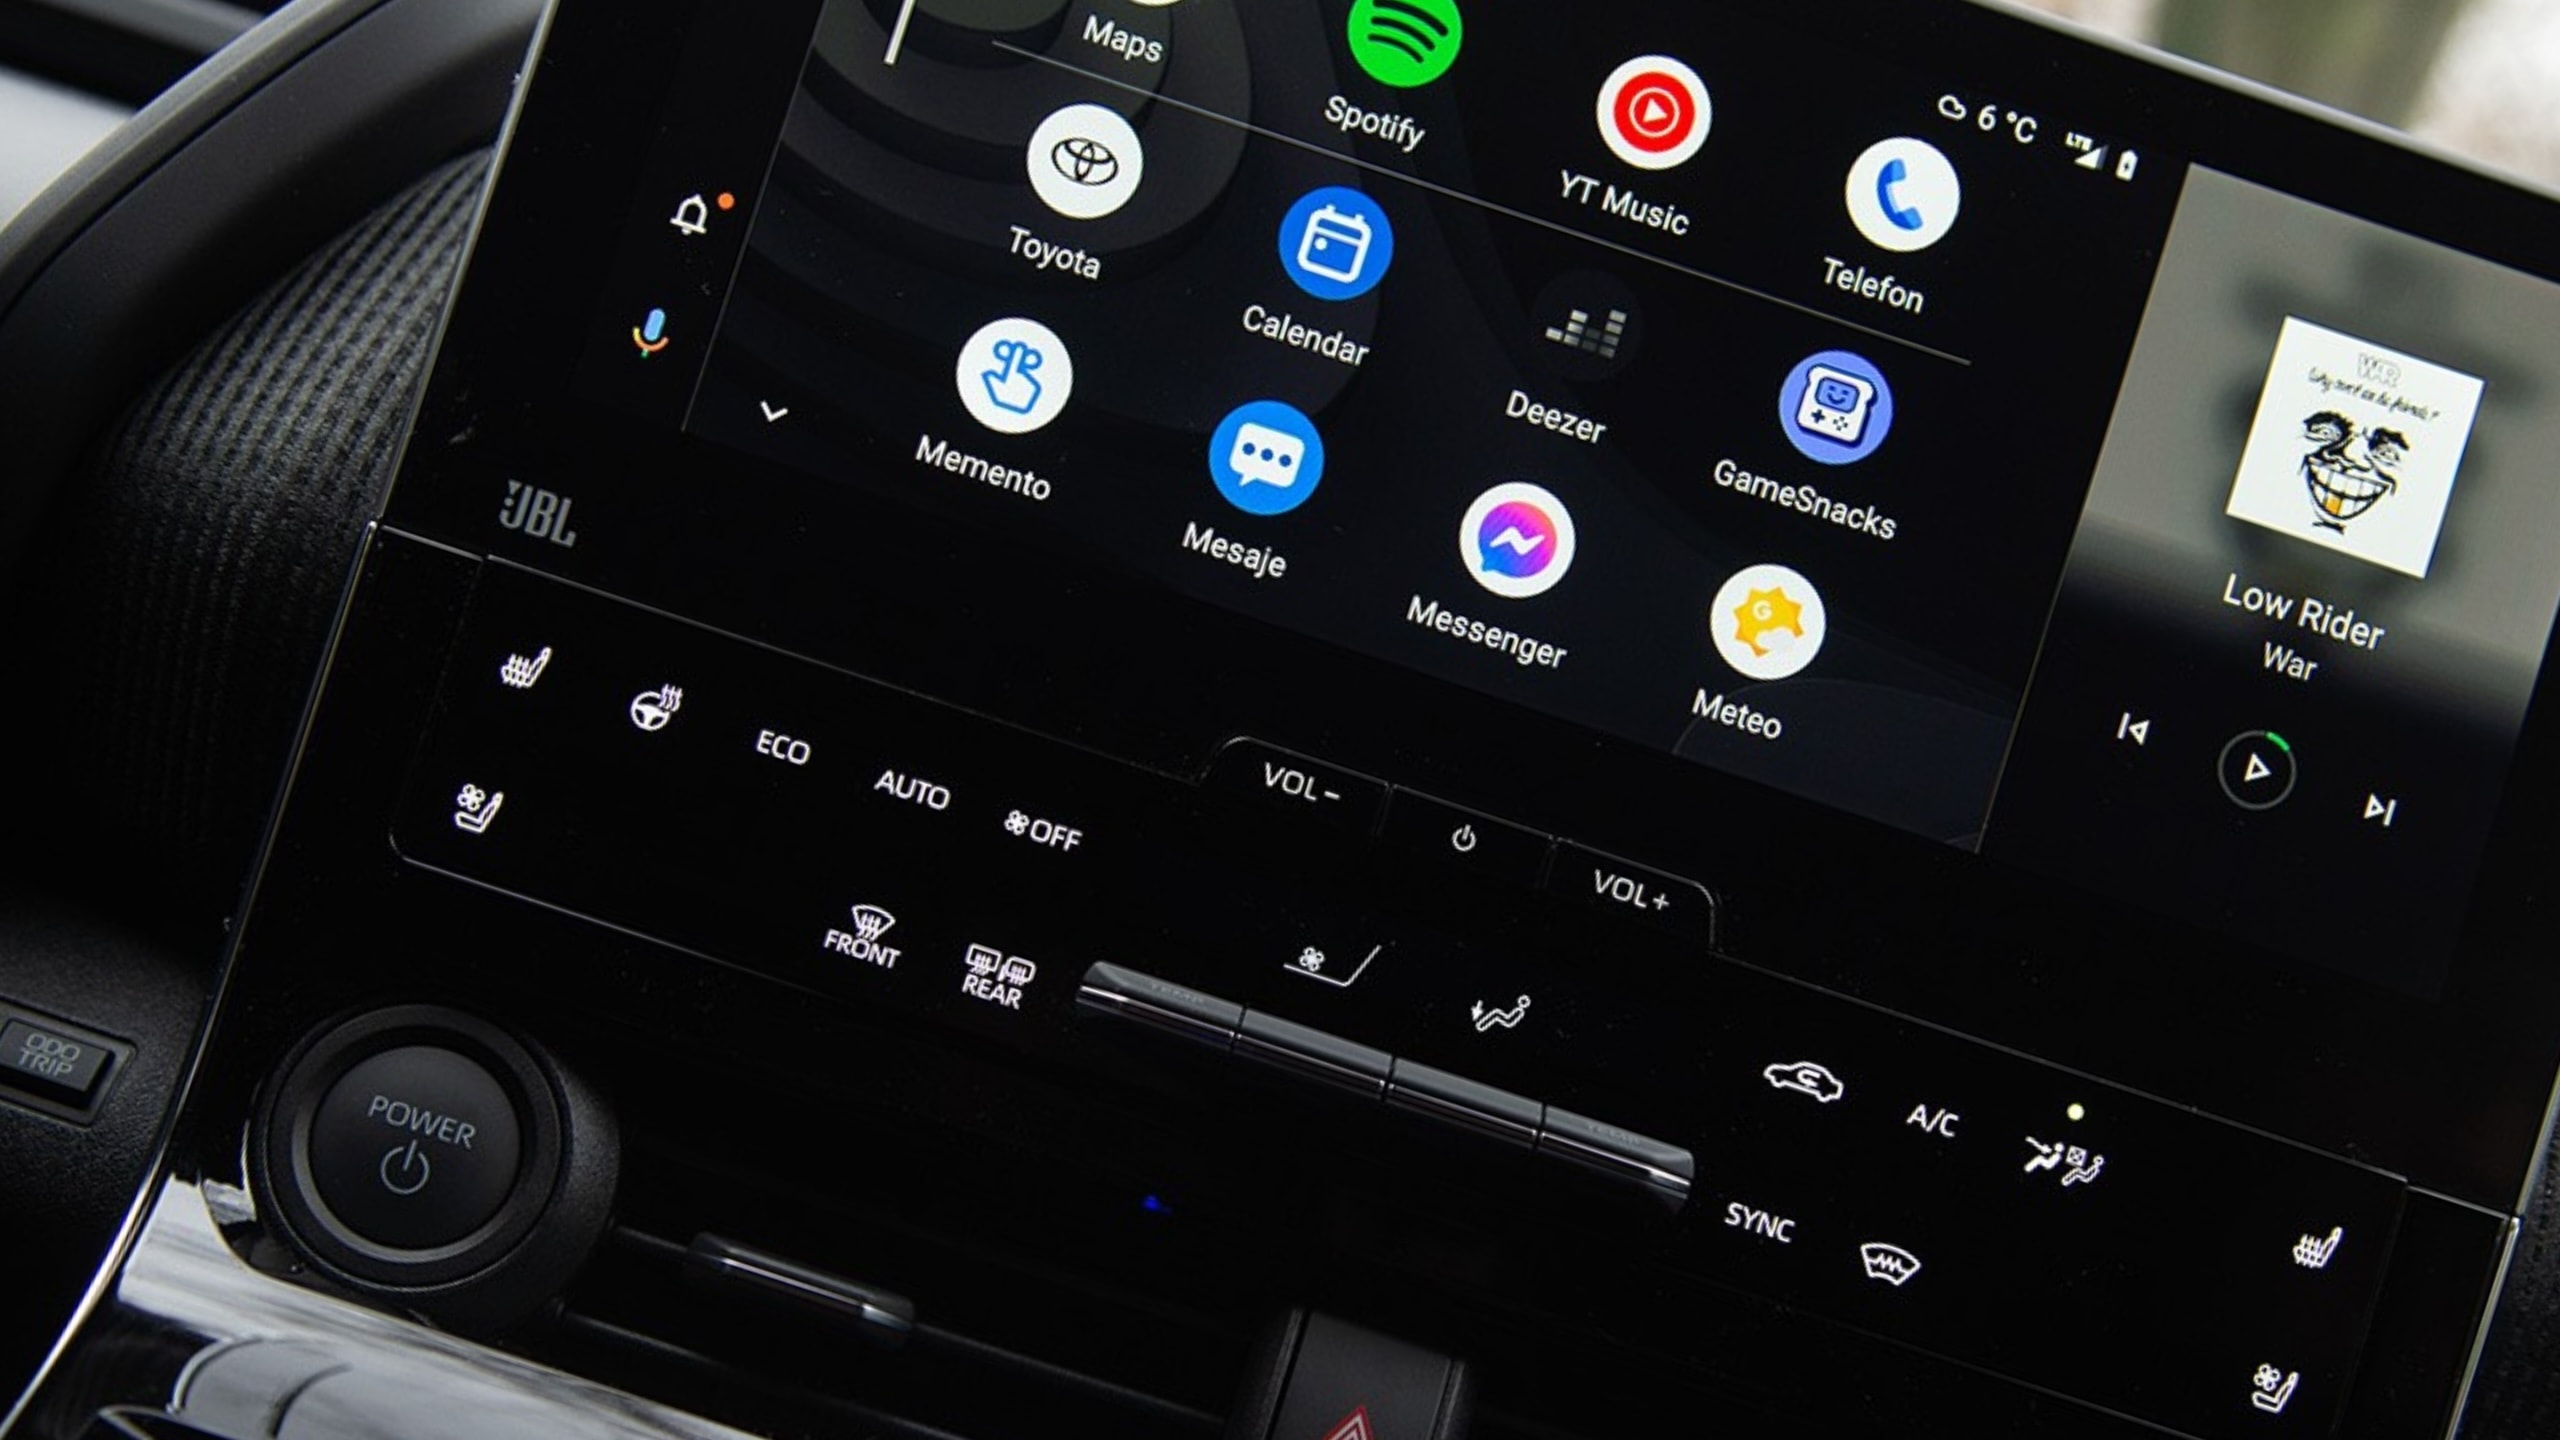 Using Android Auto with a Samsung phone is a major challenge